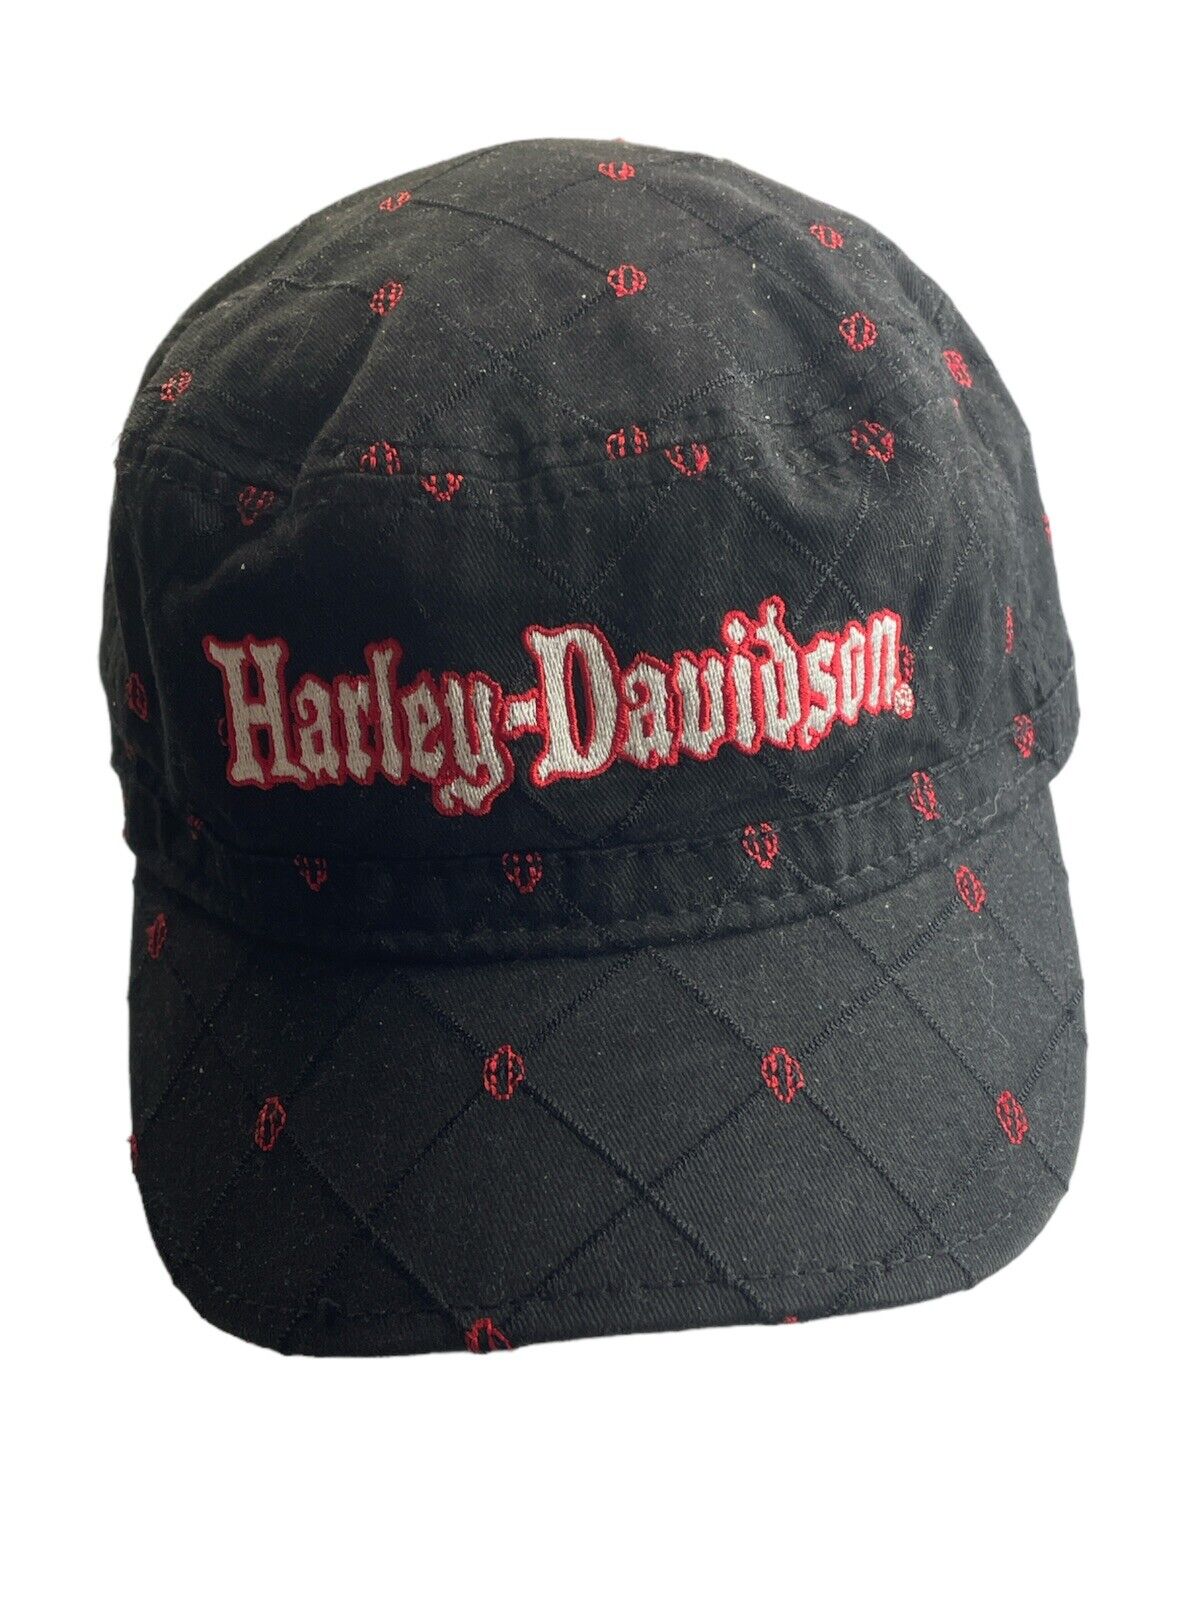 Vintage 1990's Harley Davidson Painter Style Hat One Size NEW W/O Tags